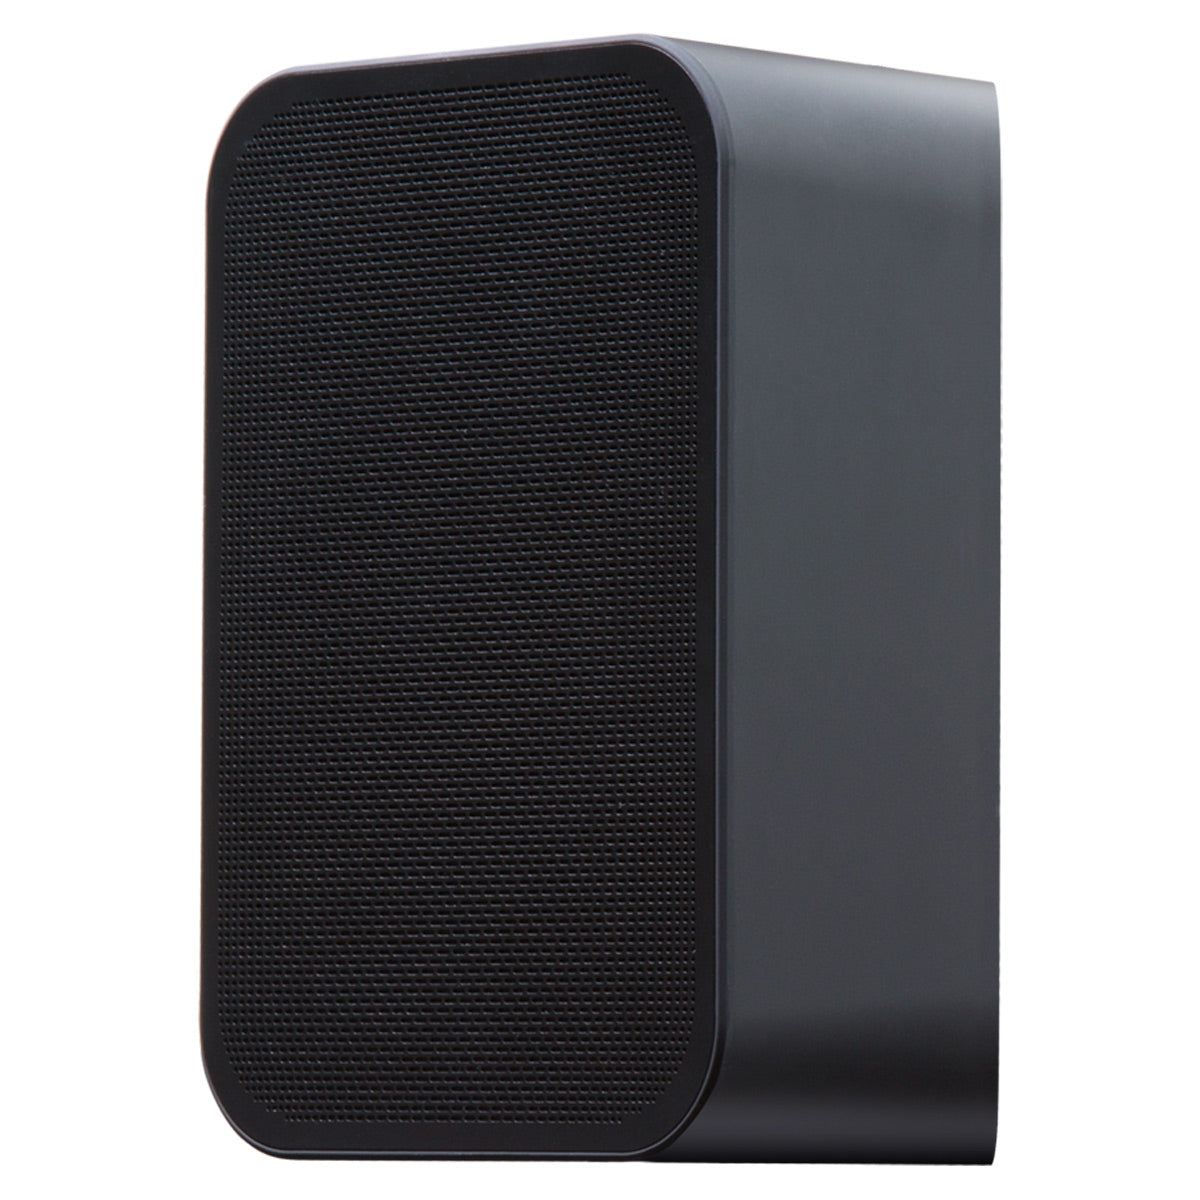 Bluesound PULSE FLEX 2i Portable Wireless Multi-Room Smart Speaker with Bluetooth, Compatible with Alexa and Siri - Each (Black)